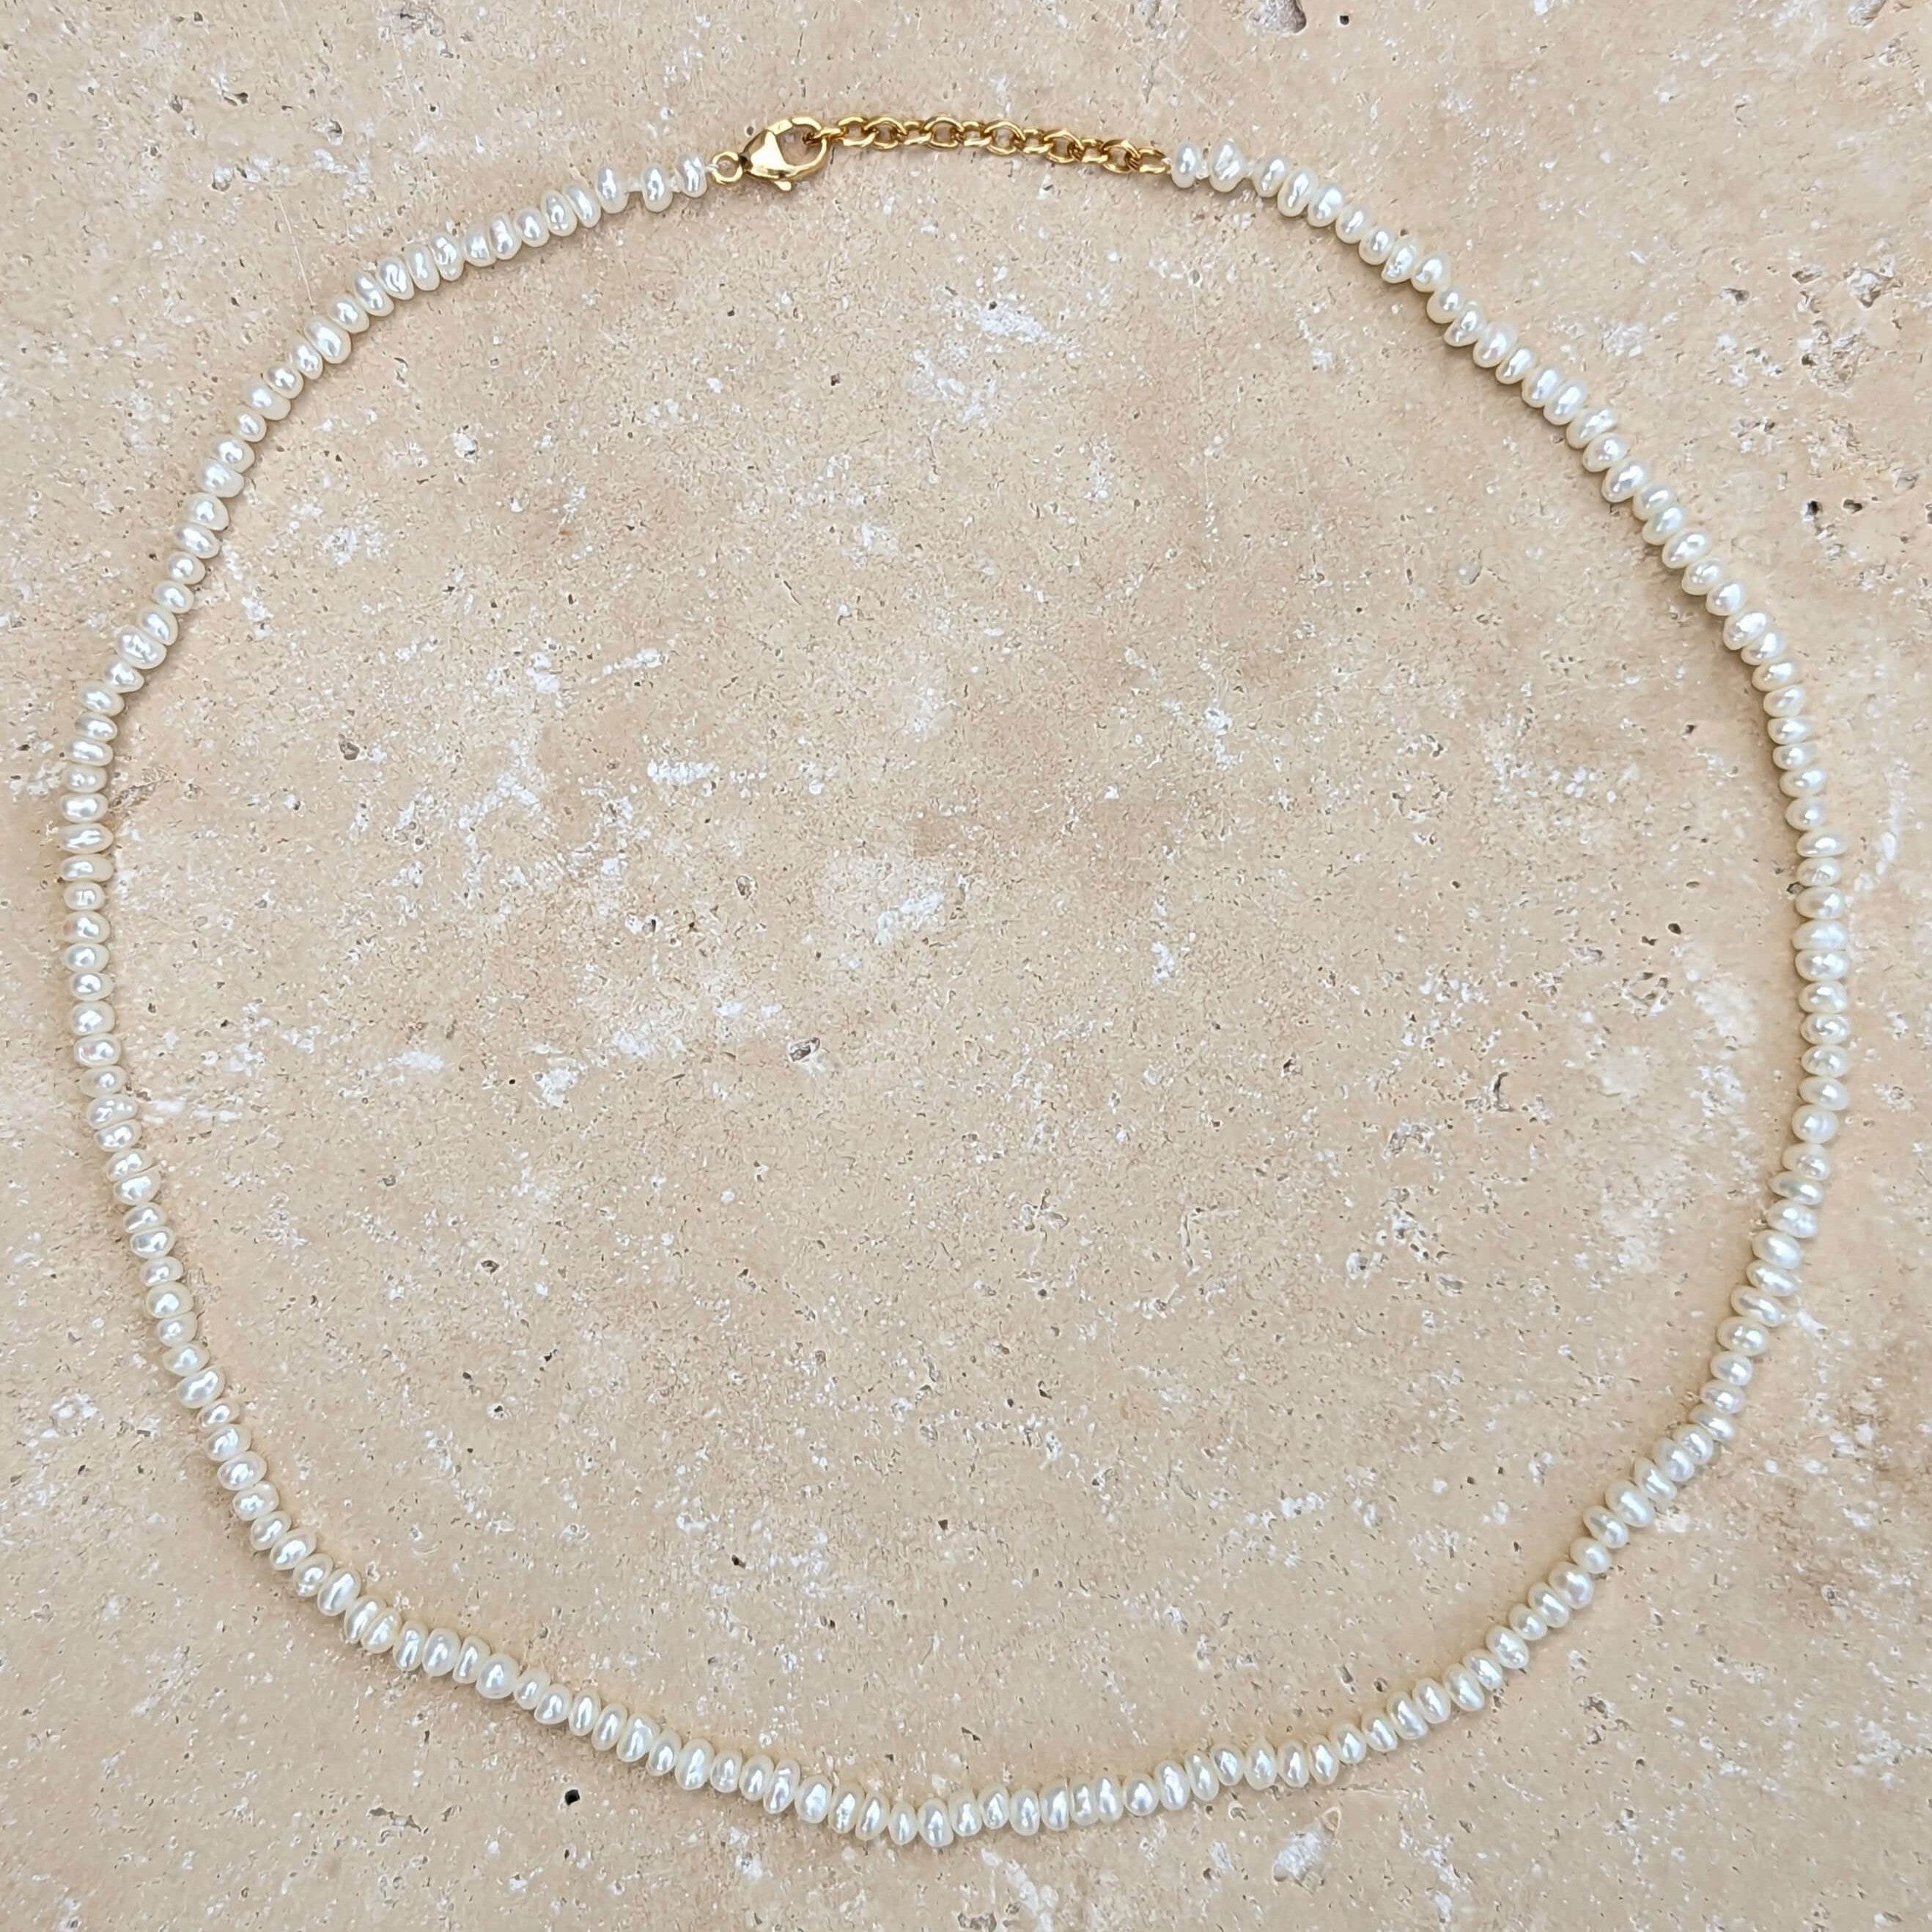 small keshi pearl necklace in gold filled